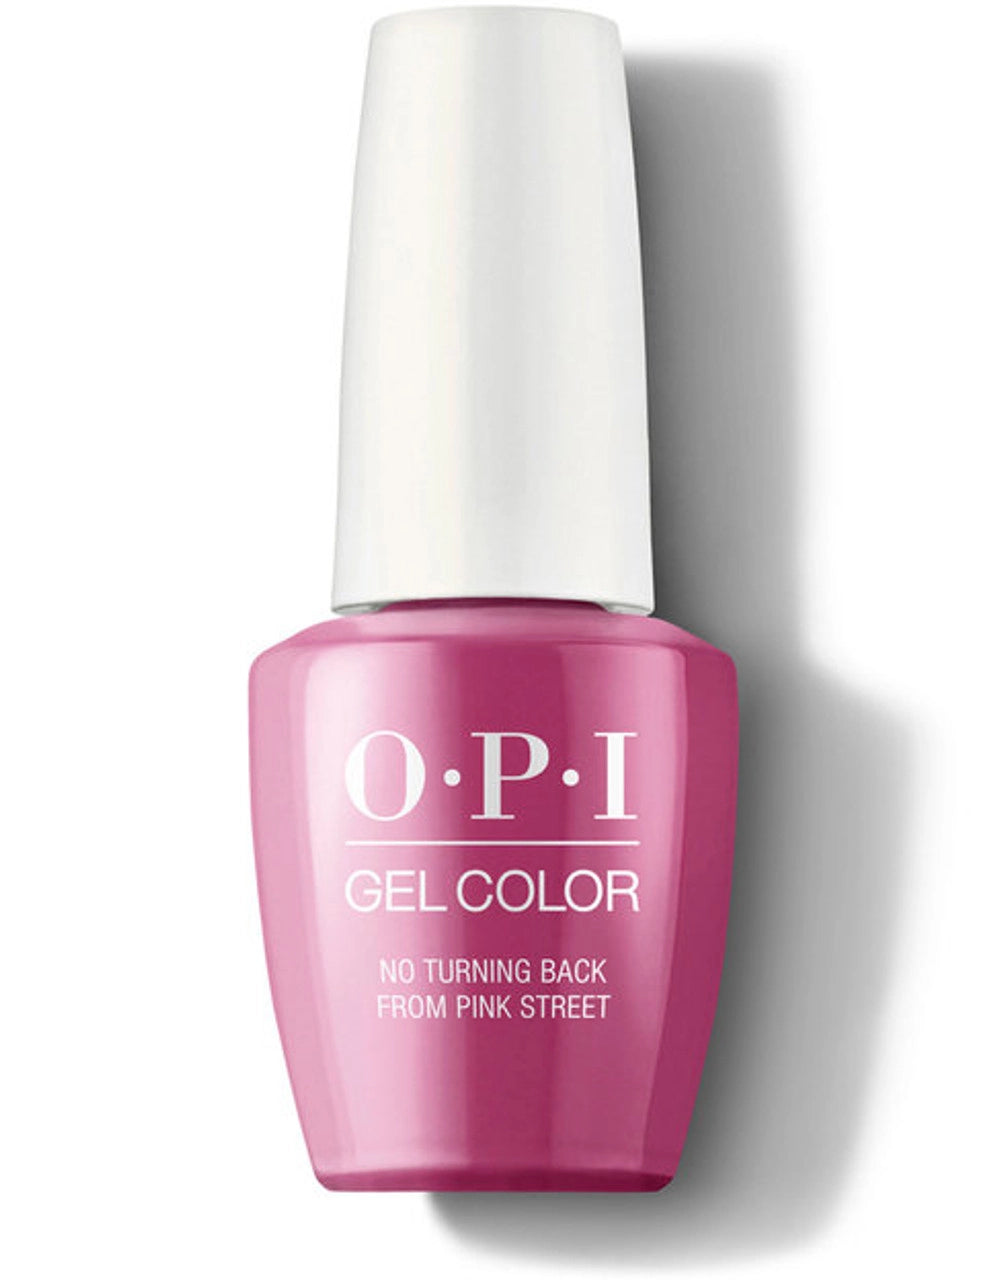 OPI Gel Color GC L19 - NO TURNING BACK FROM PINK STREET